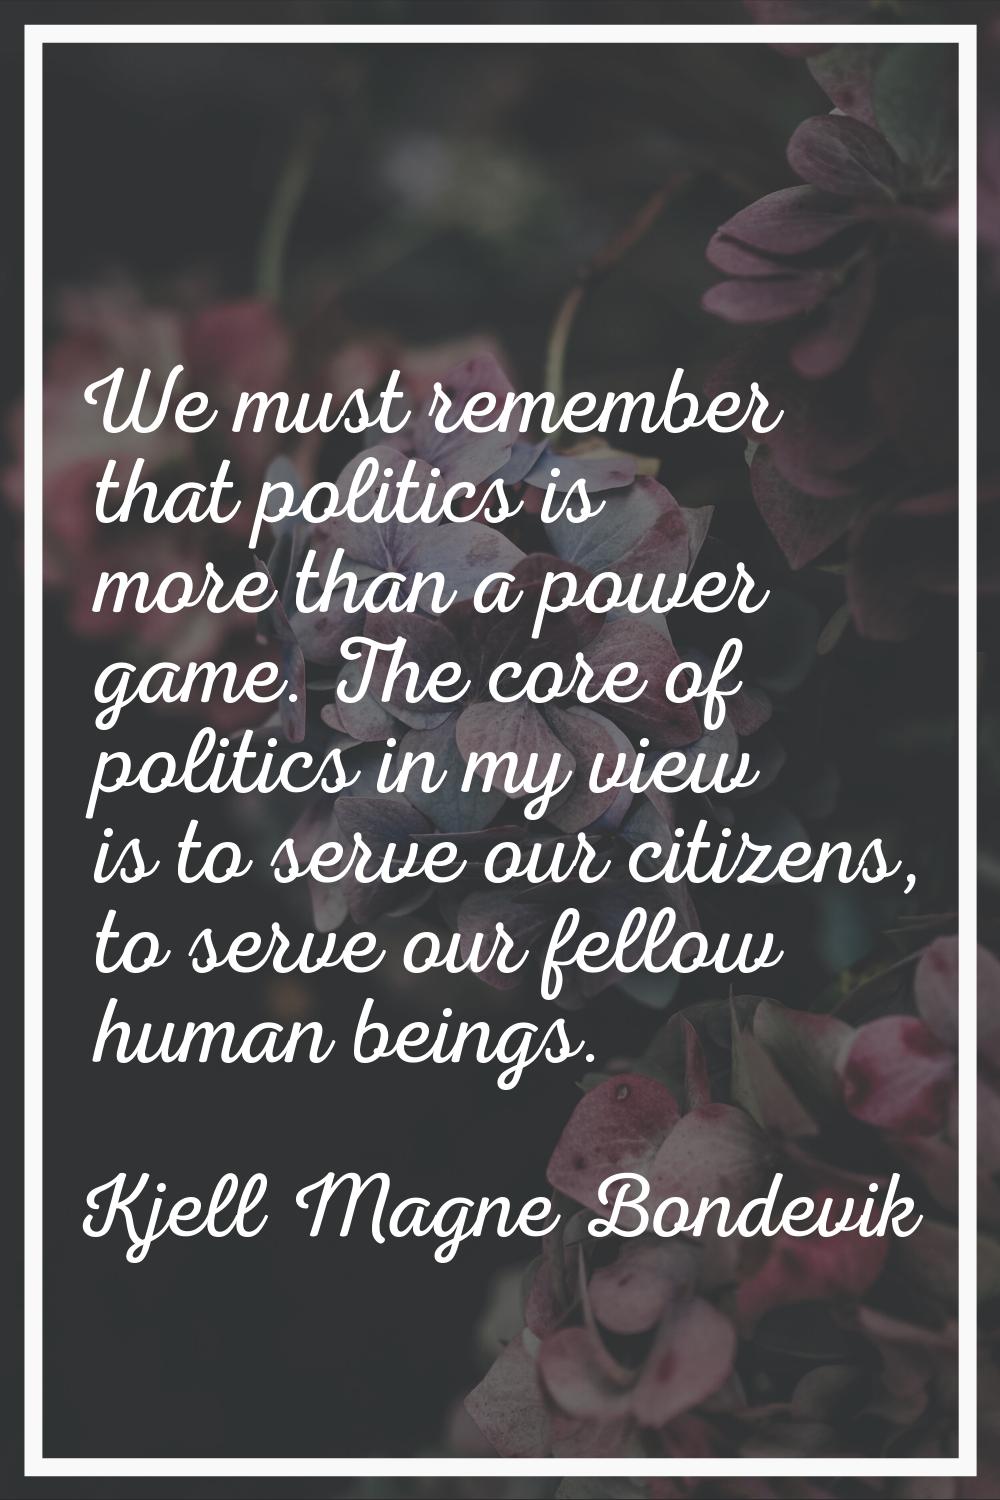 We must remember that politics is more than a power game. The core of politics in my view is to ser